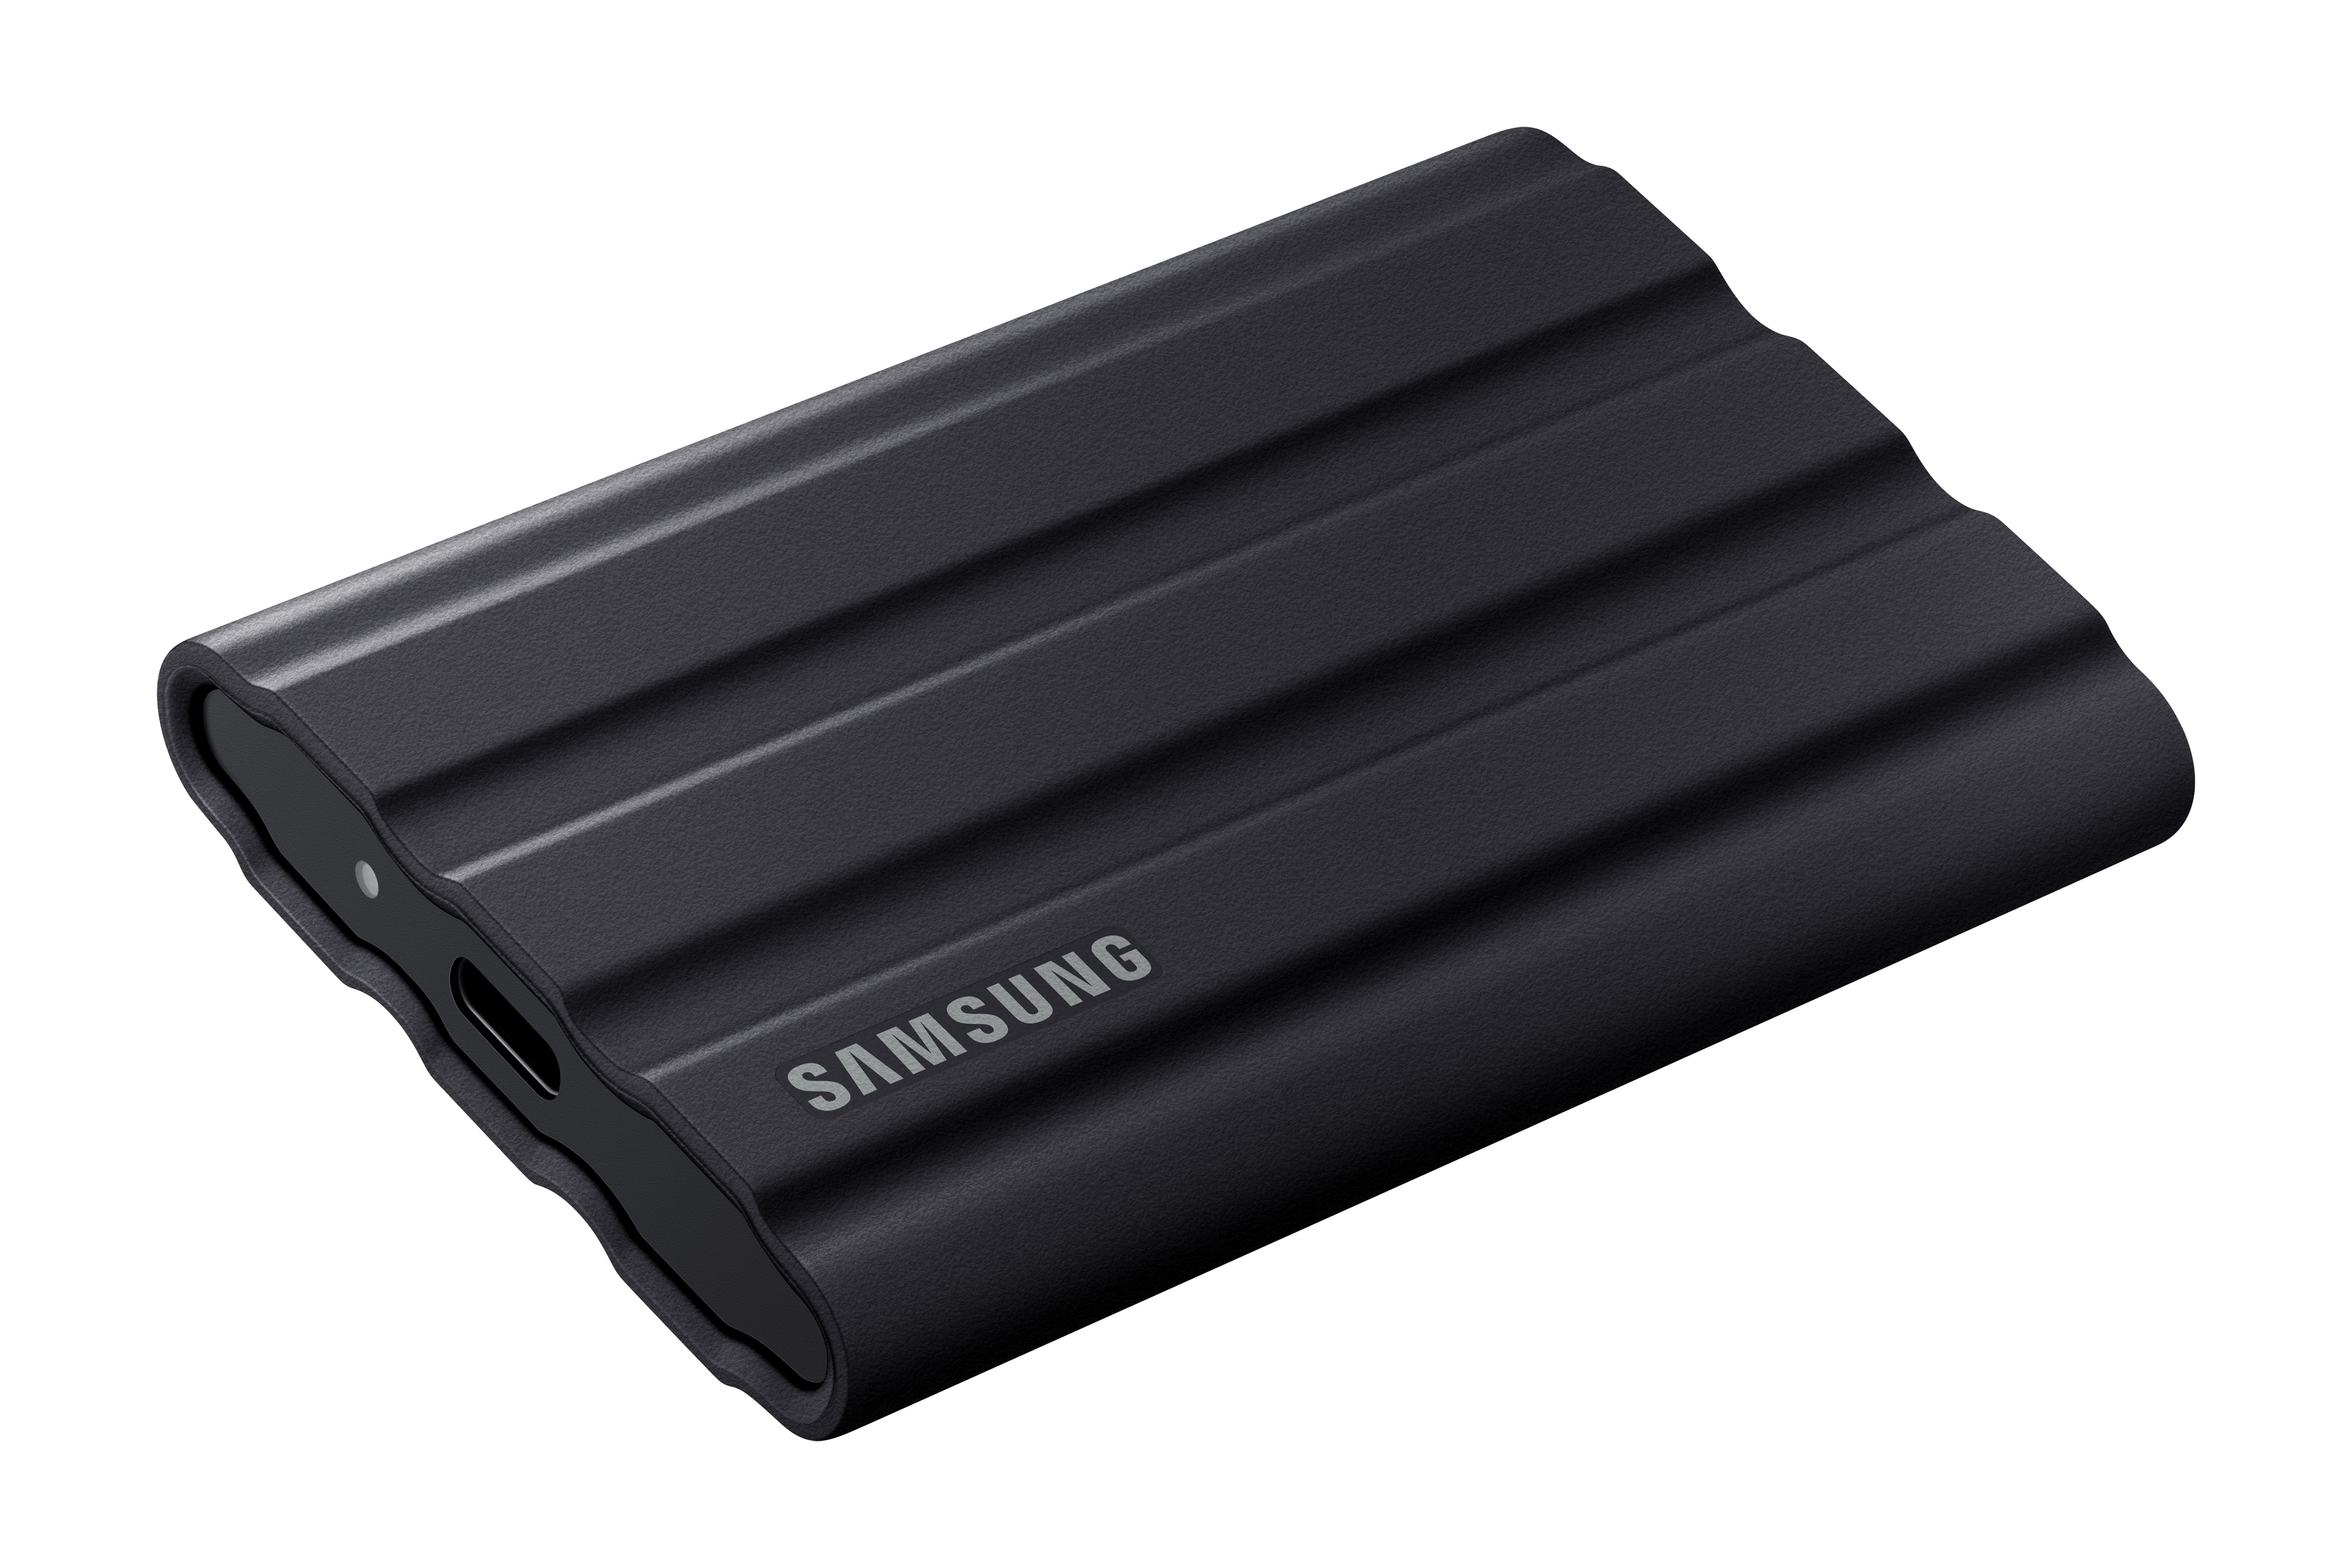 Samsung T7 Shield portable SSD review: Ultra-fast and built to last |  PCWorld